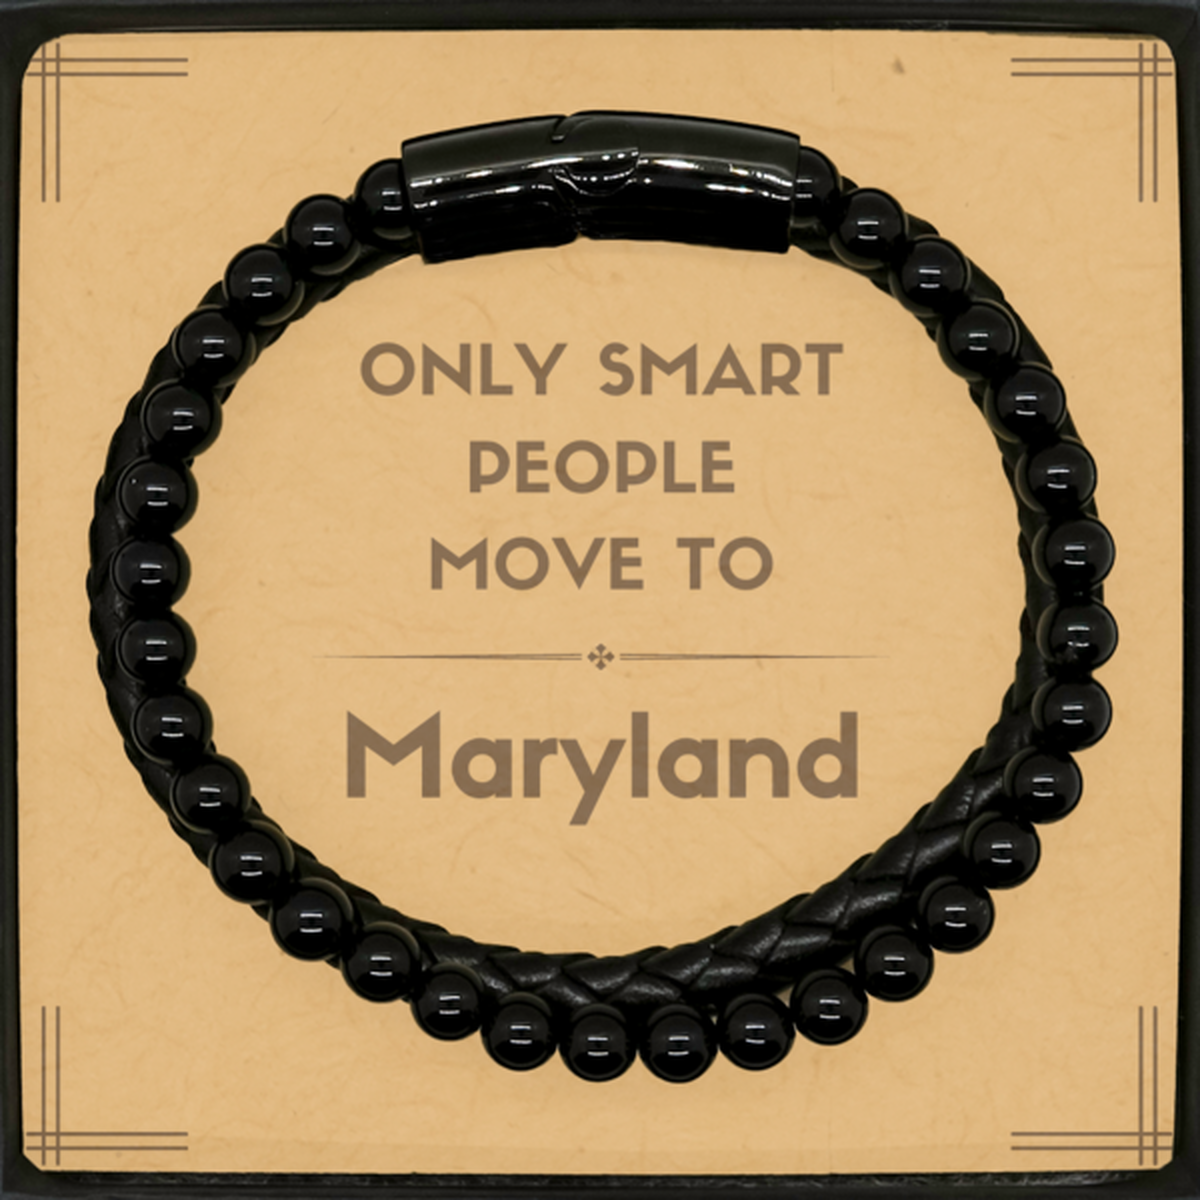 Only smart people move to Maryland Stone Leather Bracelets, Message Card Gifts For Maryland, Move to Maryland Gifts for Friends Coworker Funny Saying Quote